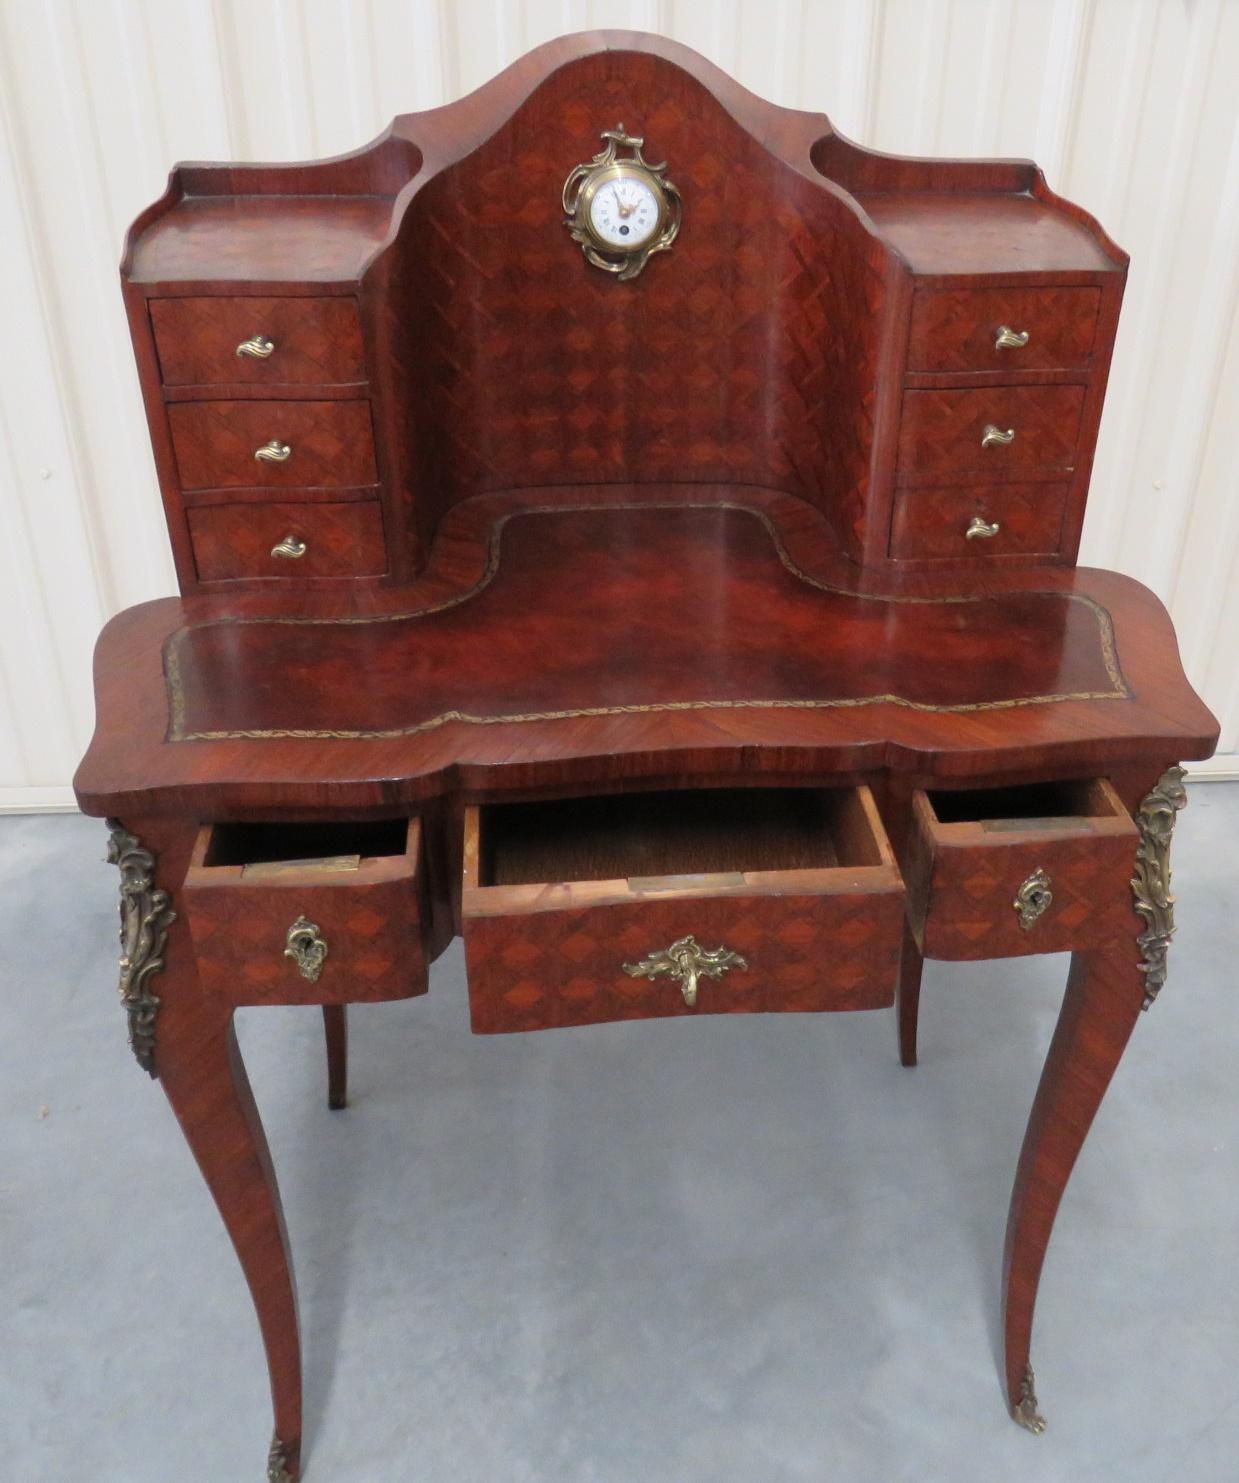 Rare Size Rosewood French Louis XVI Leather Top Rosewood Desk With Clock  1